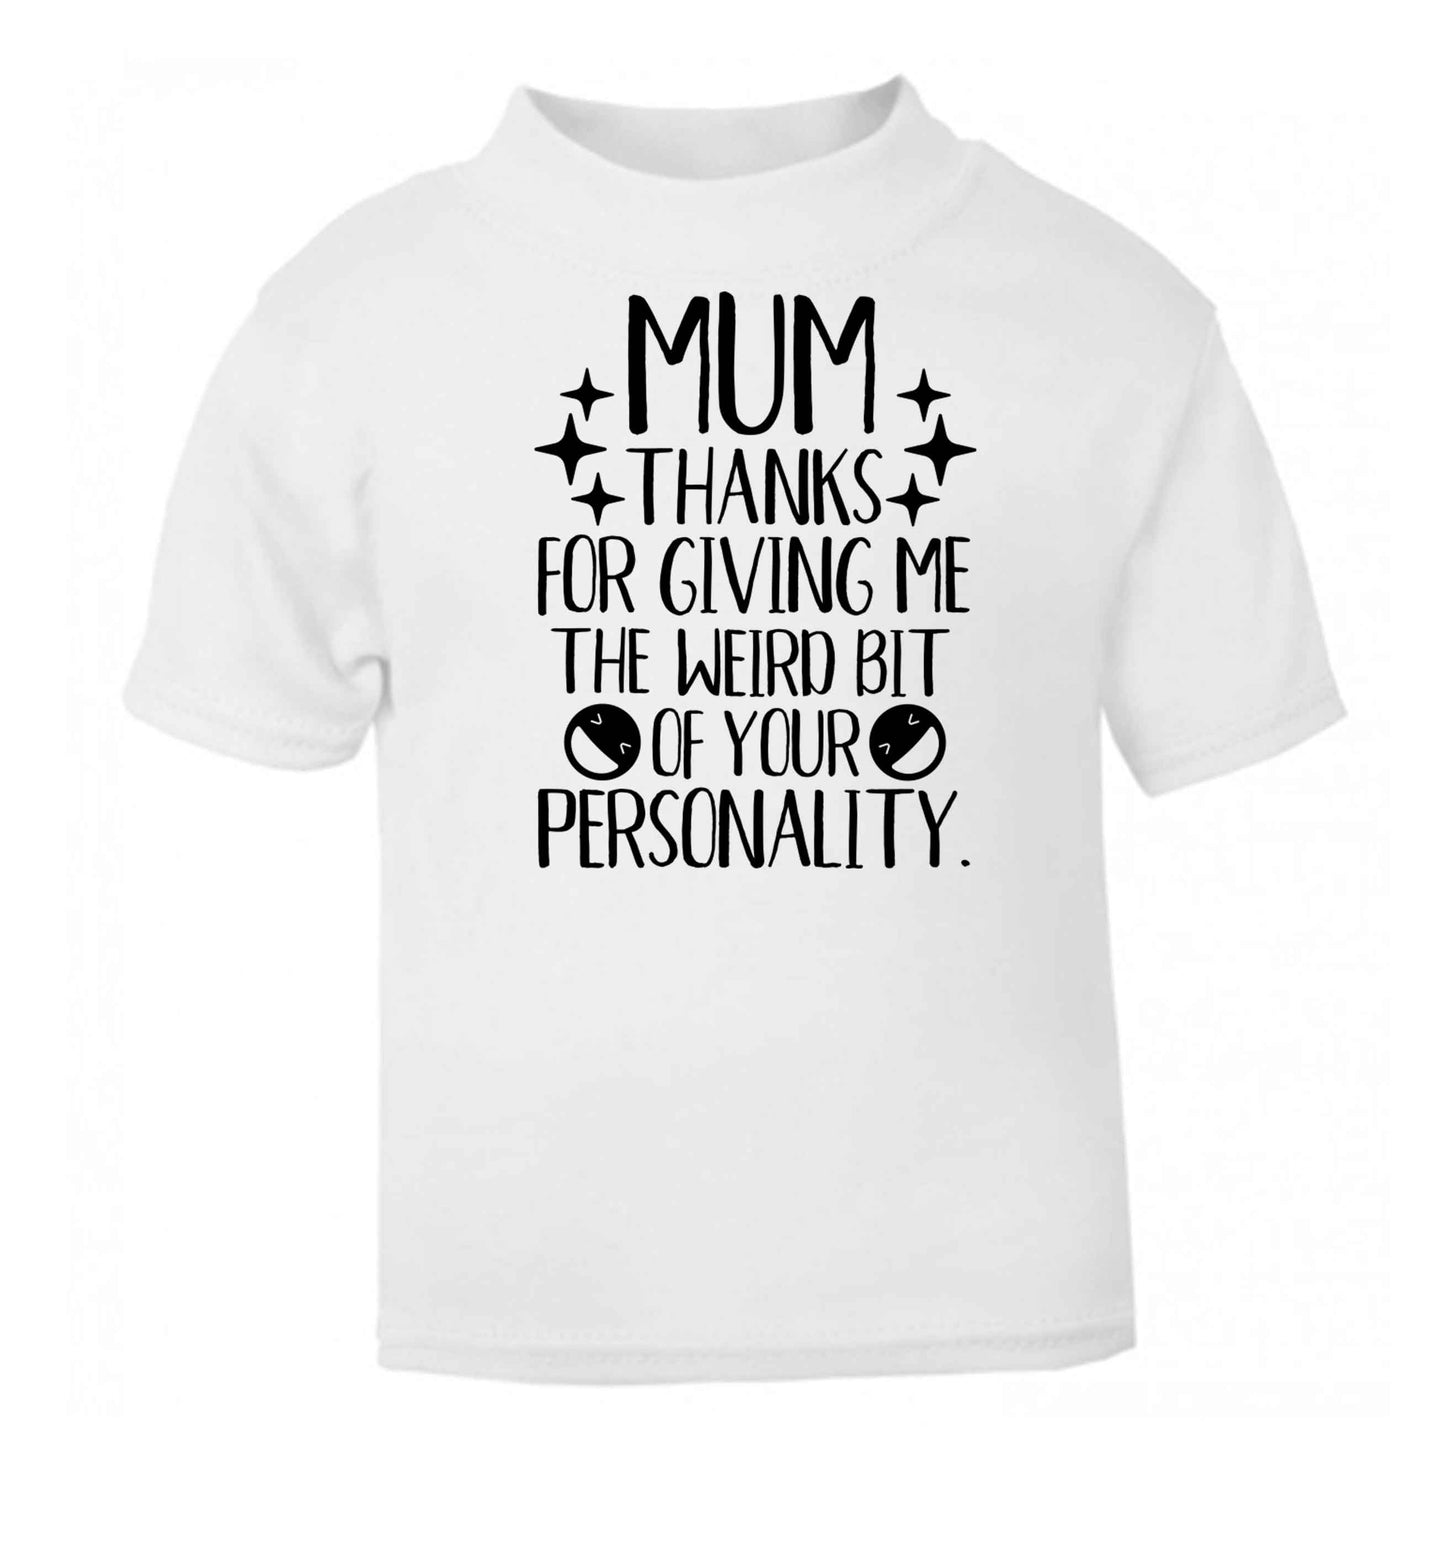 Mum thanks for giving me the weird bit of your personality white baby toddler Tshirt 2 Years